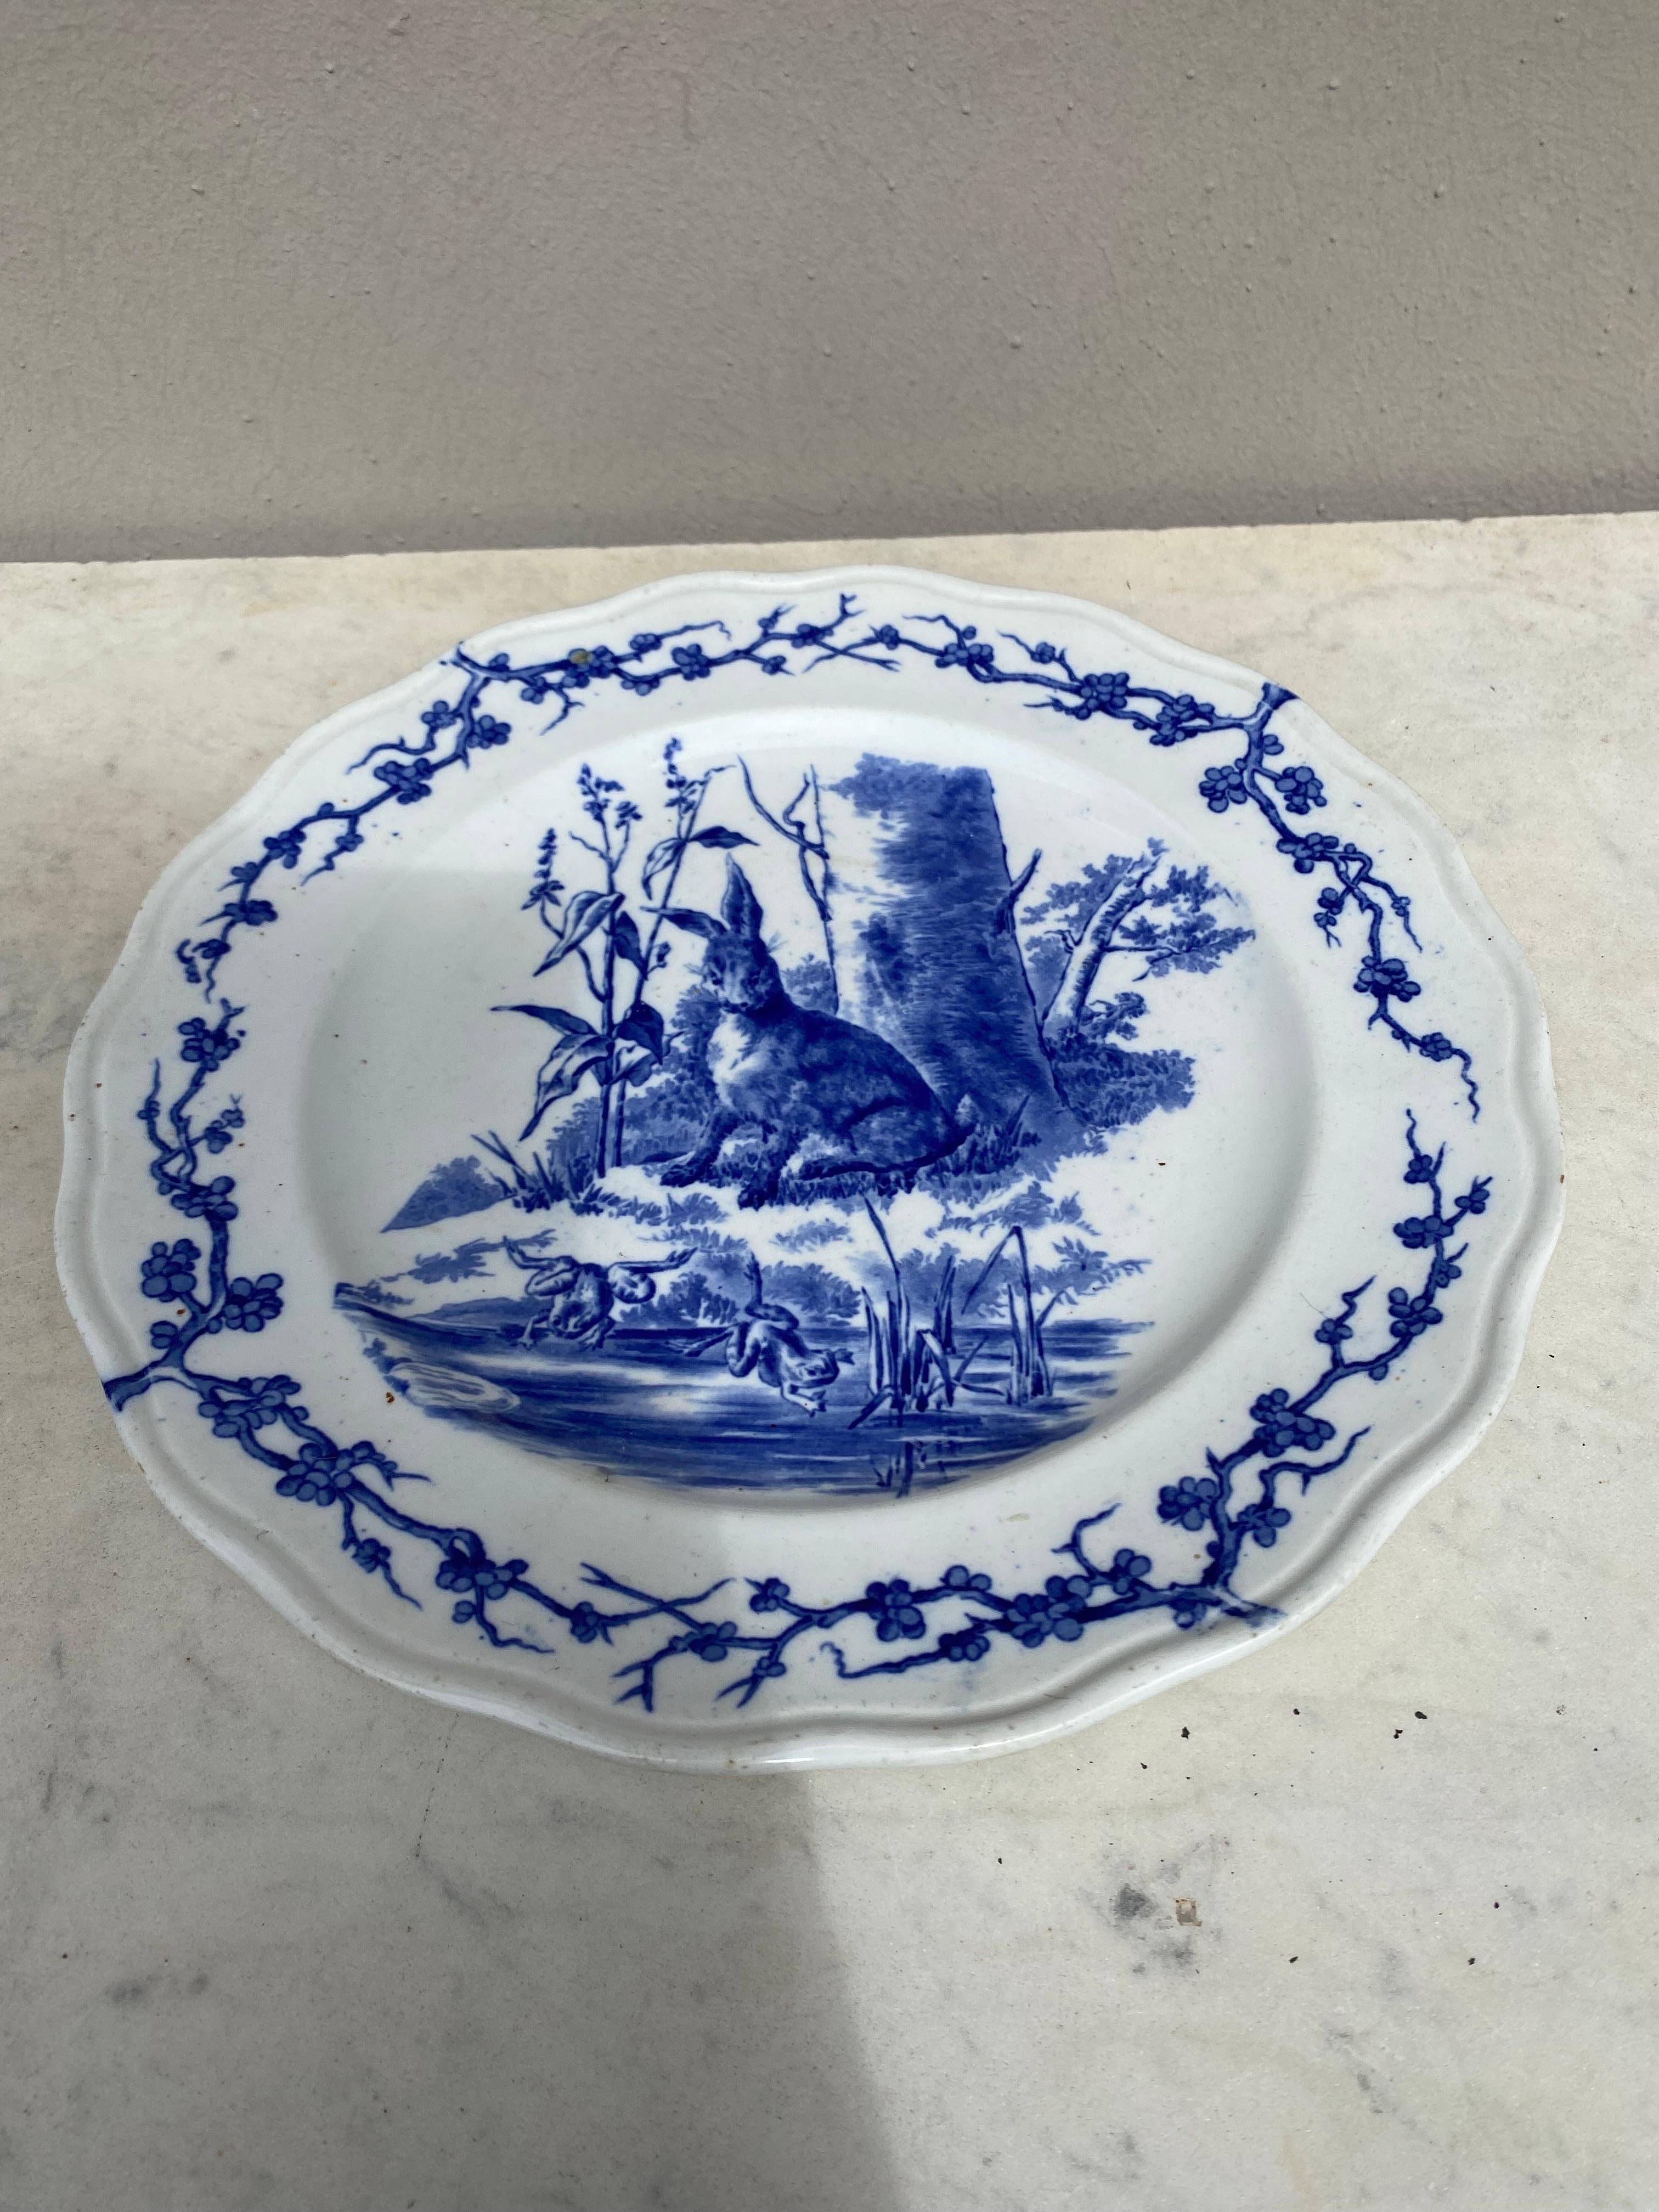 English blue & white plate hare and frogs Brown Westhead and Moore, circa 1890.
Was sold in the Grand Depot 21 rue Drouot Paris.
Fontaine / Aesops Fables
English Losange mark.